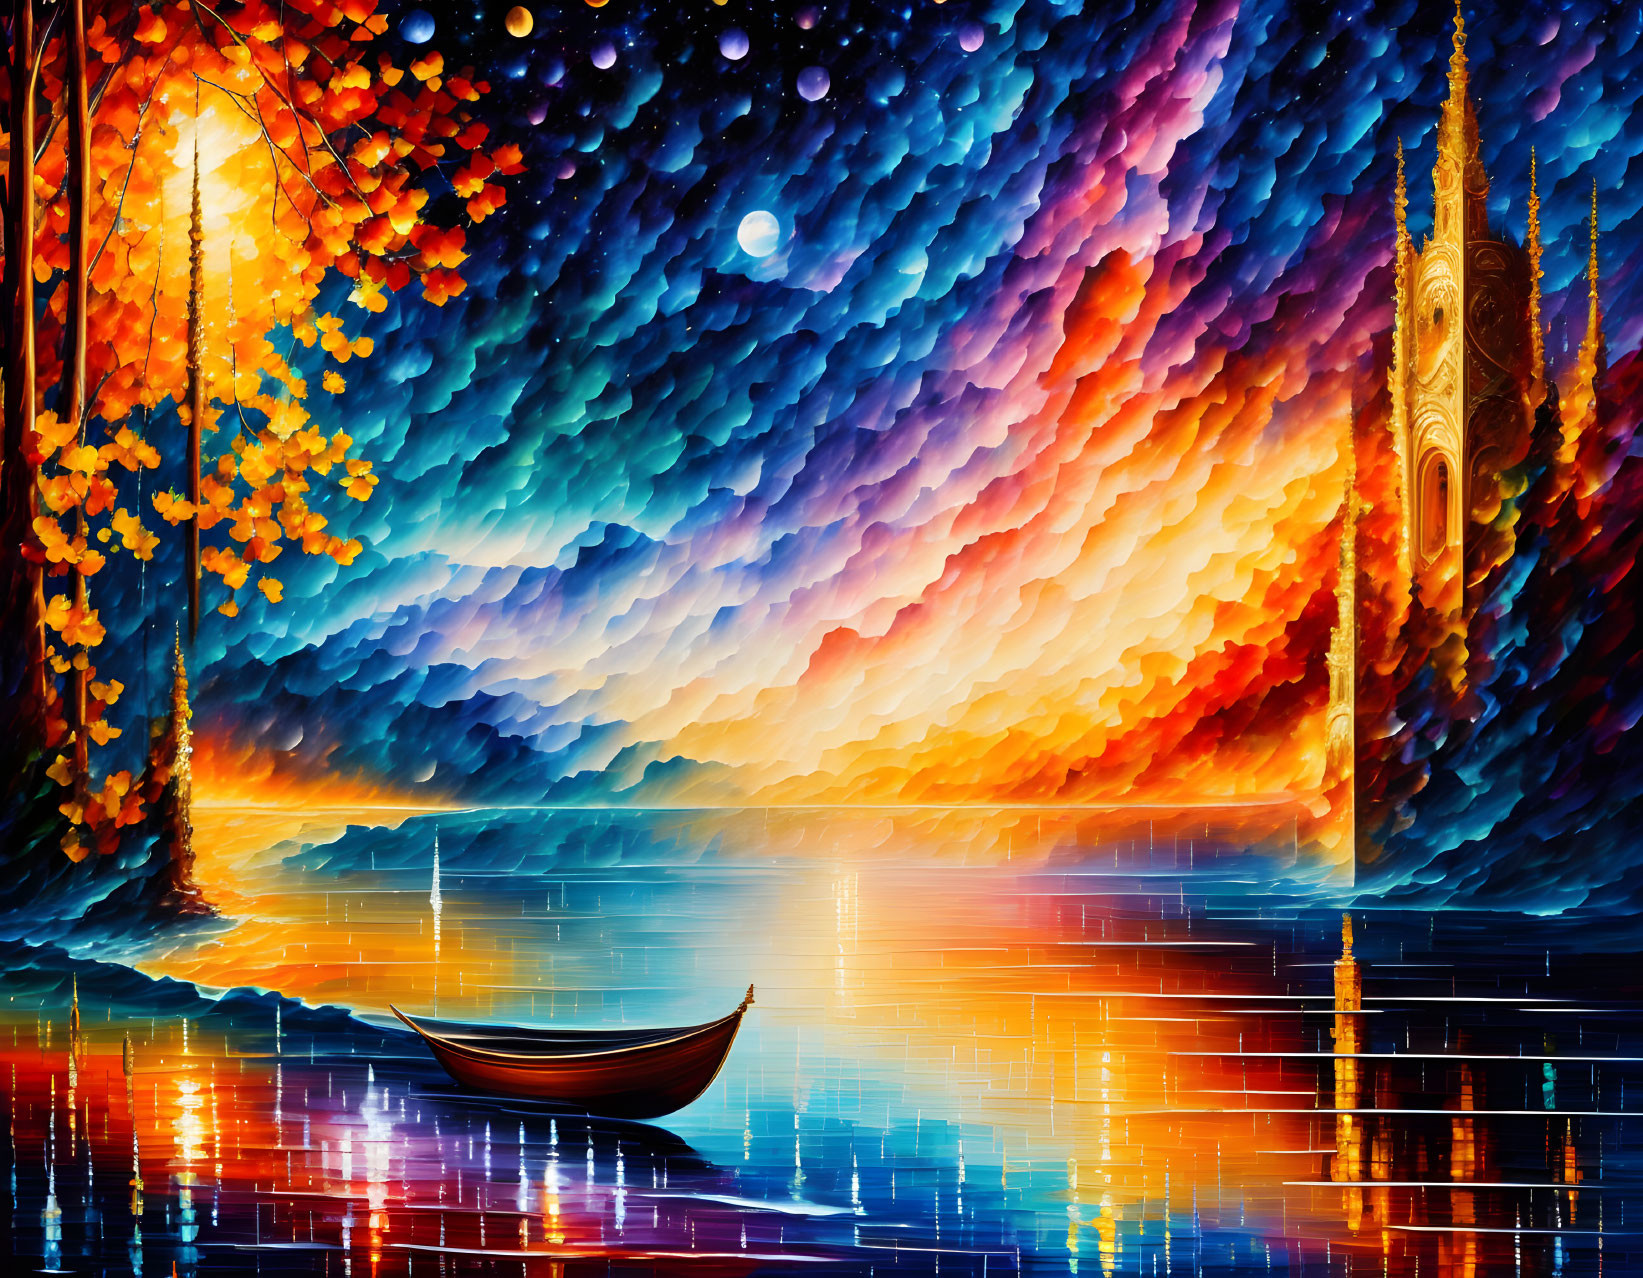 Colorful Landscape Painting: Sunset Sky, Calm Sea, Boat, Autumn Trees, Gothic Architecture